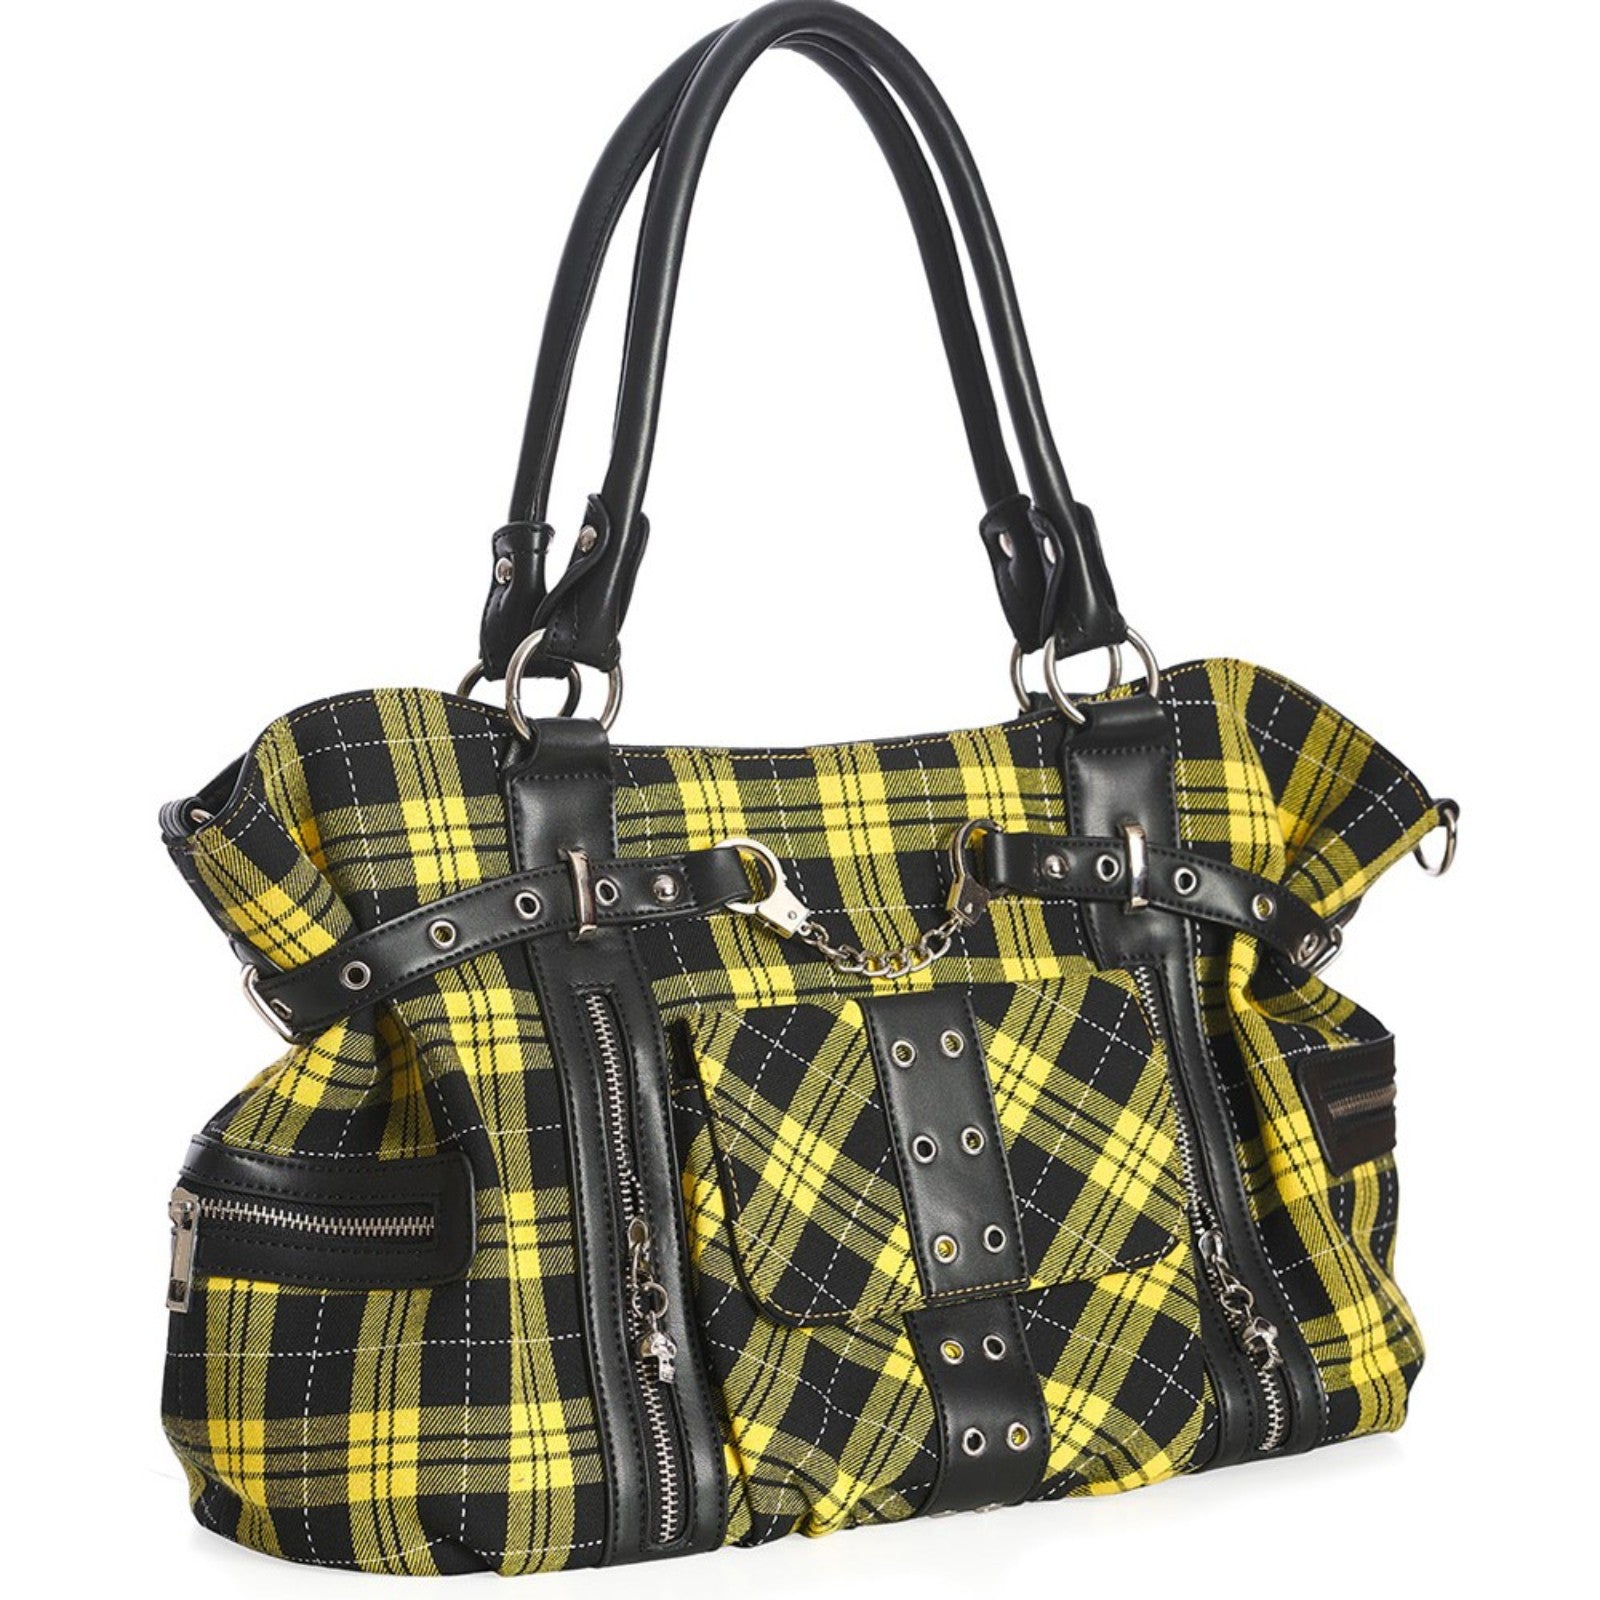 Banned Rise Up Gothic Handcuff Punk Bag, Yellow